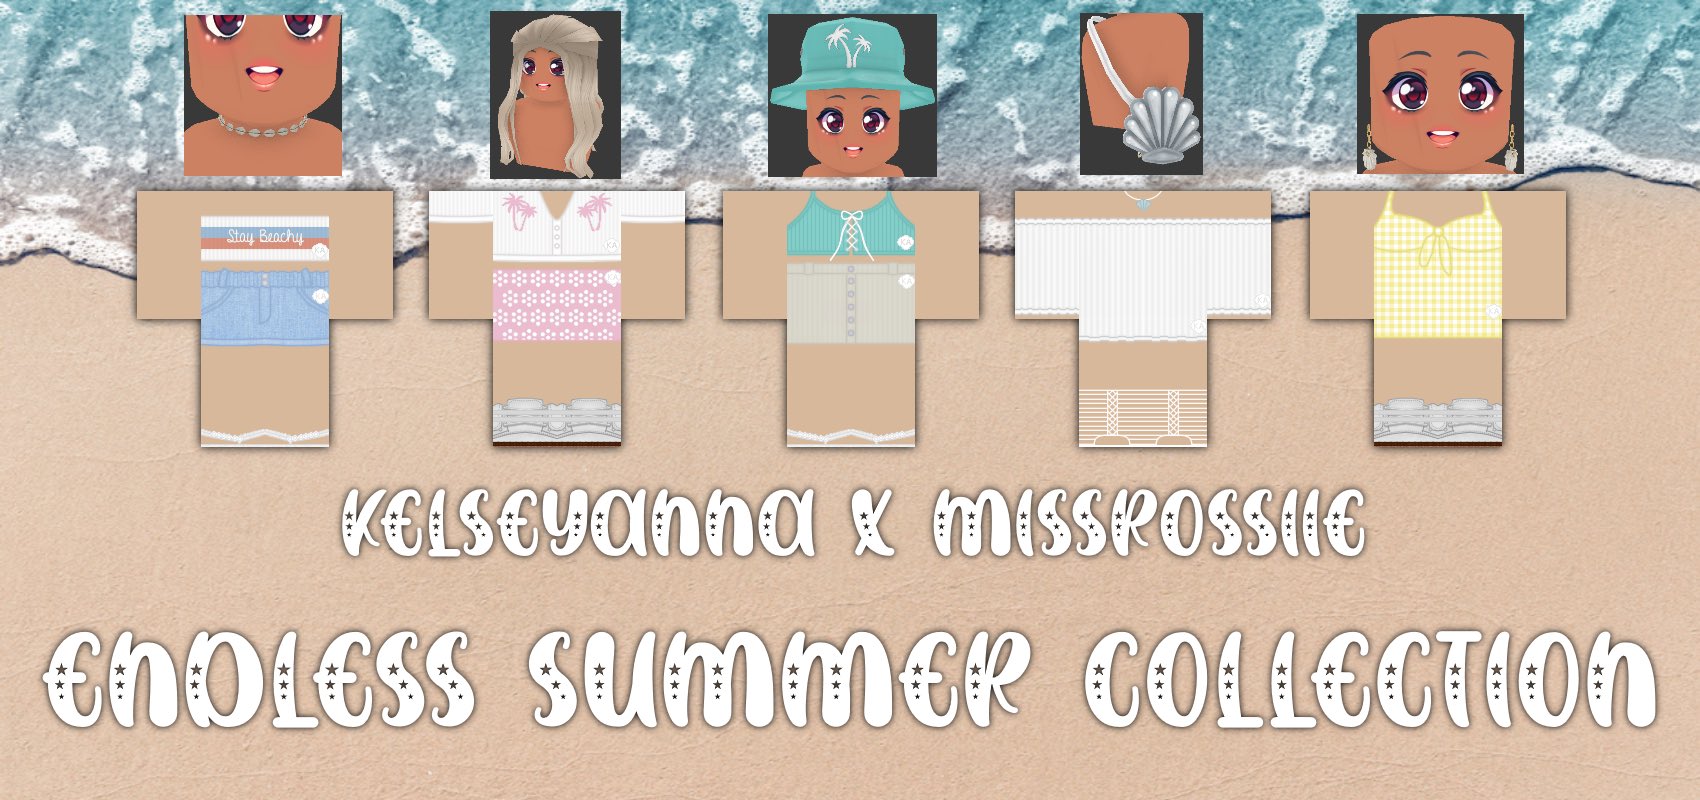 Kelsey Johnson On Twitter The Endless Summer Collection Is Out Now By R0ssiie And I All The Links For The Hats And Outfits Will Be Below This Tweet You Can Now Be - roblox on twitter the roblox summer games are in full